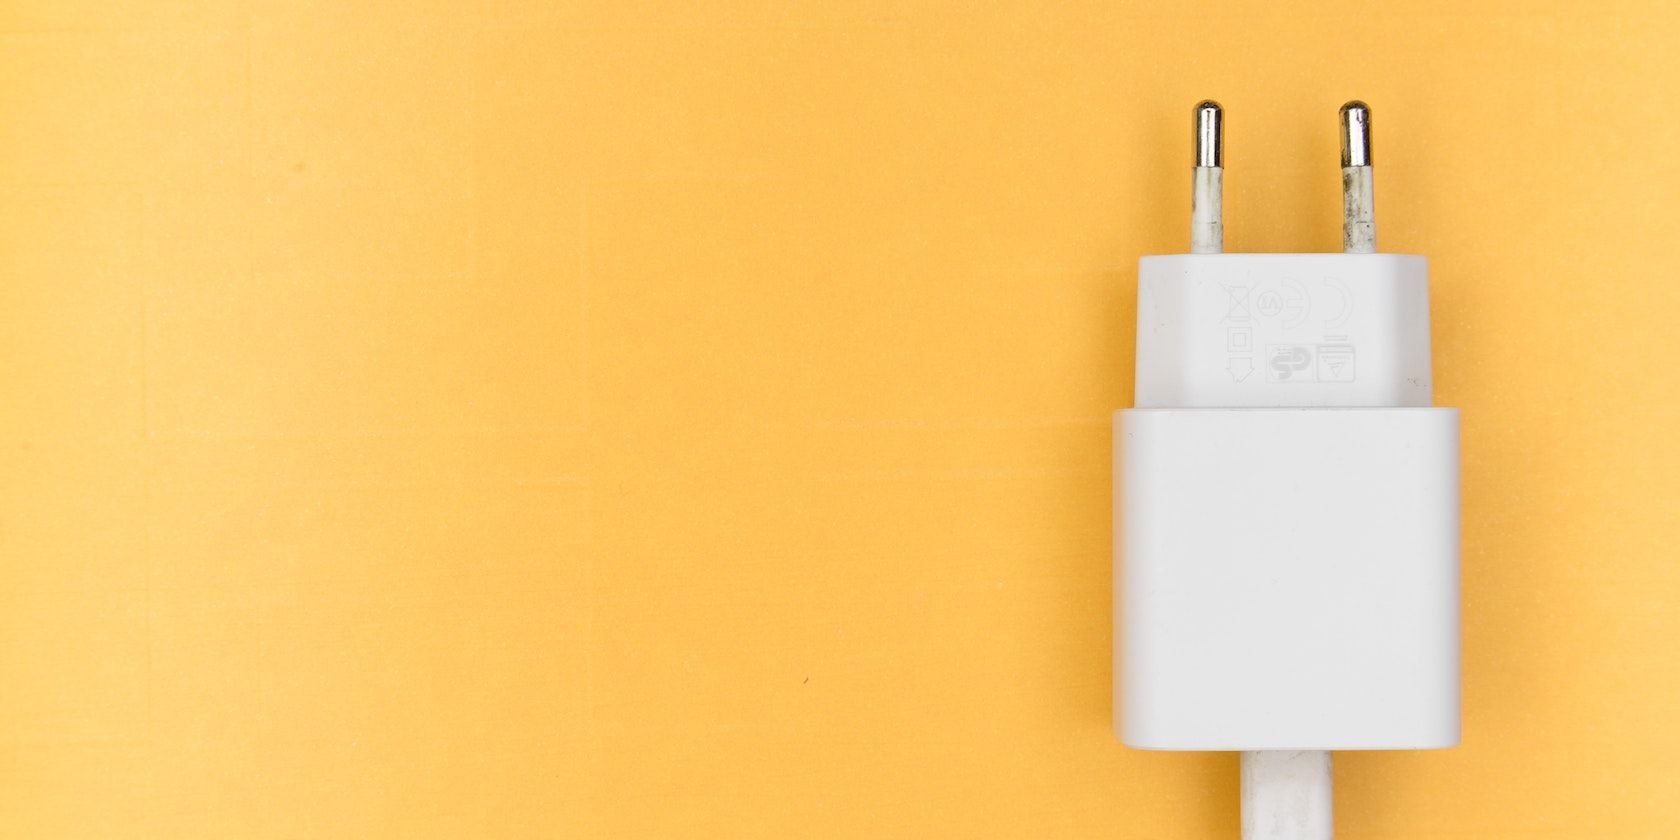 Iphone adapter on yellow background